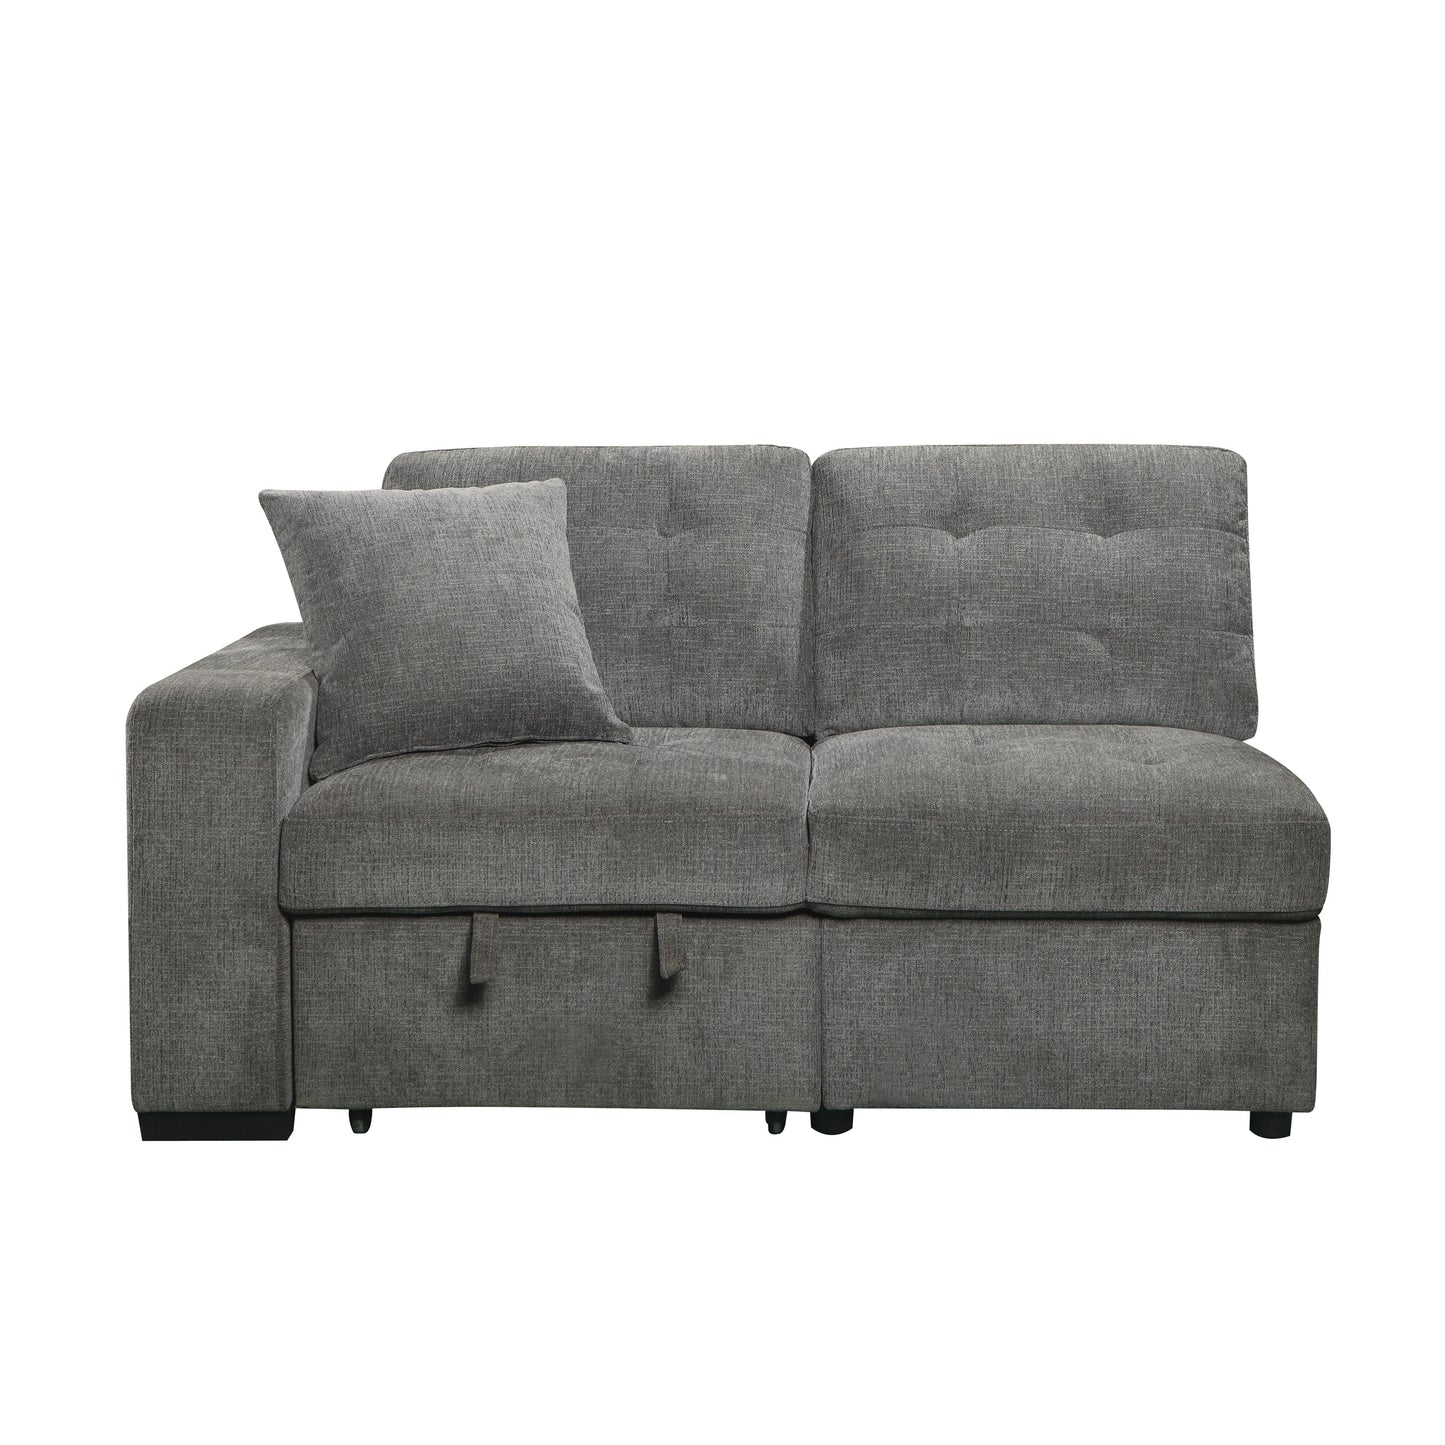 Logansport 2-Piece Sectional with Pull-out Ottoman GREY